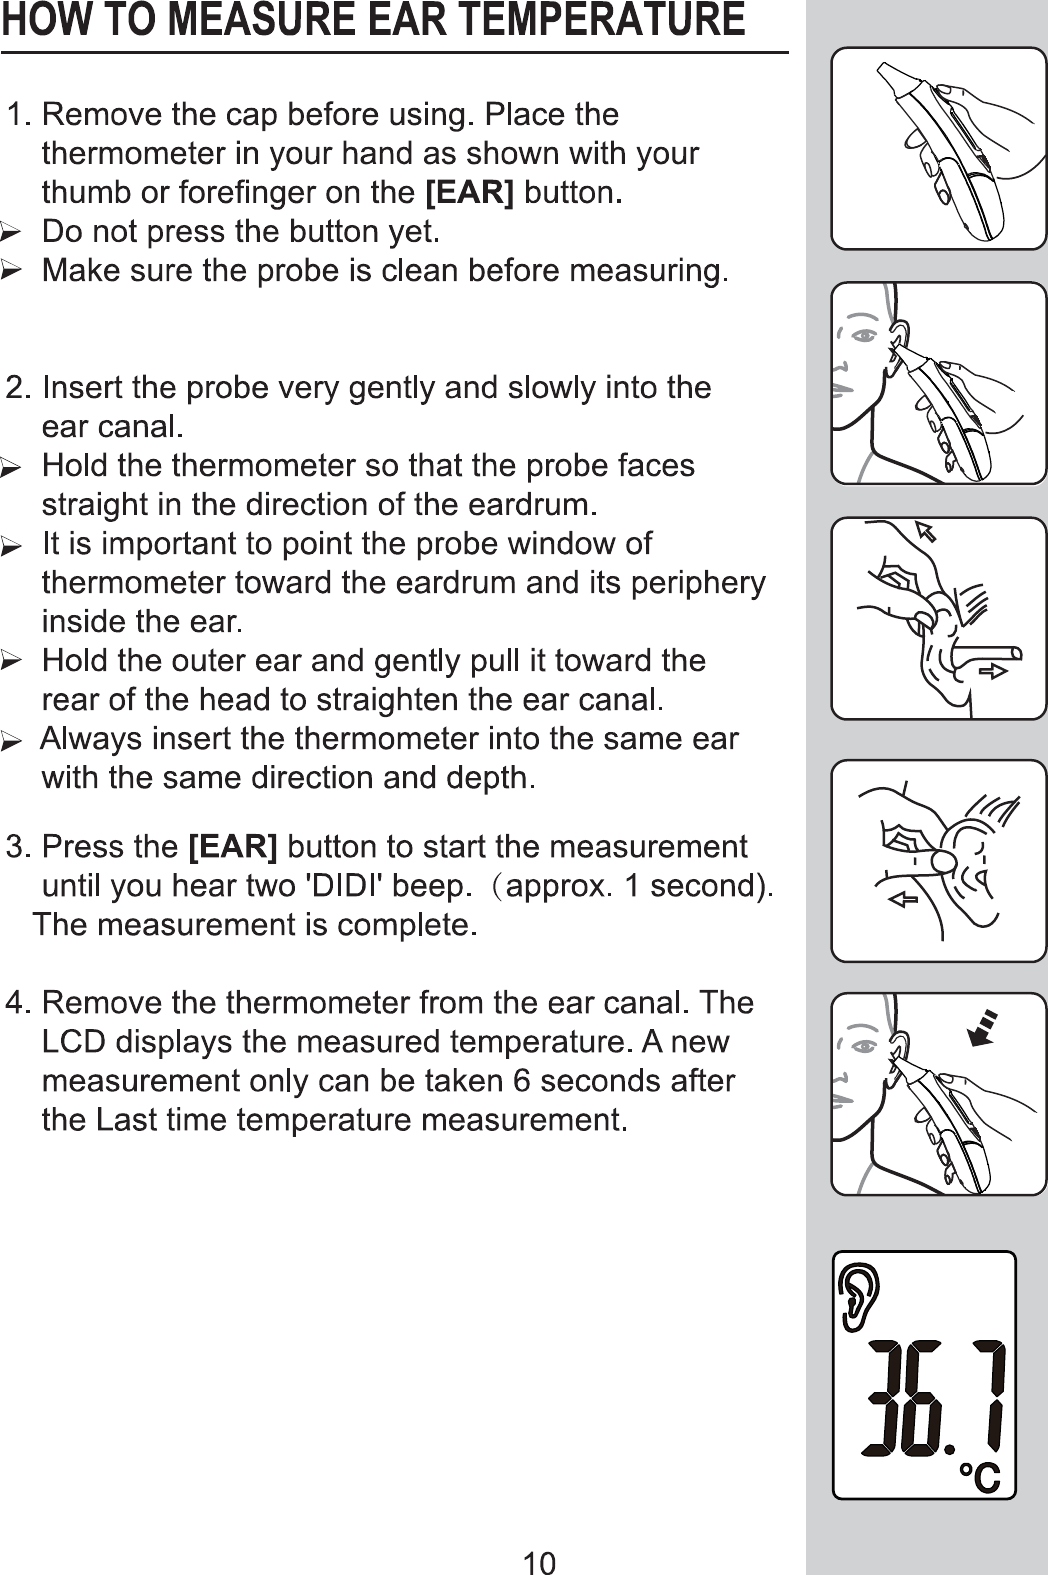 Page 10 of Dongdixin Technology BLUENRG-V10 Digital Ear Thermometer User Manual